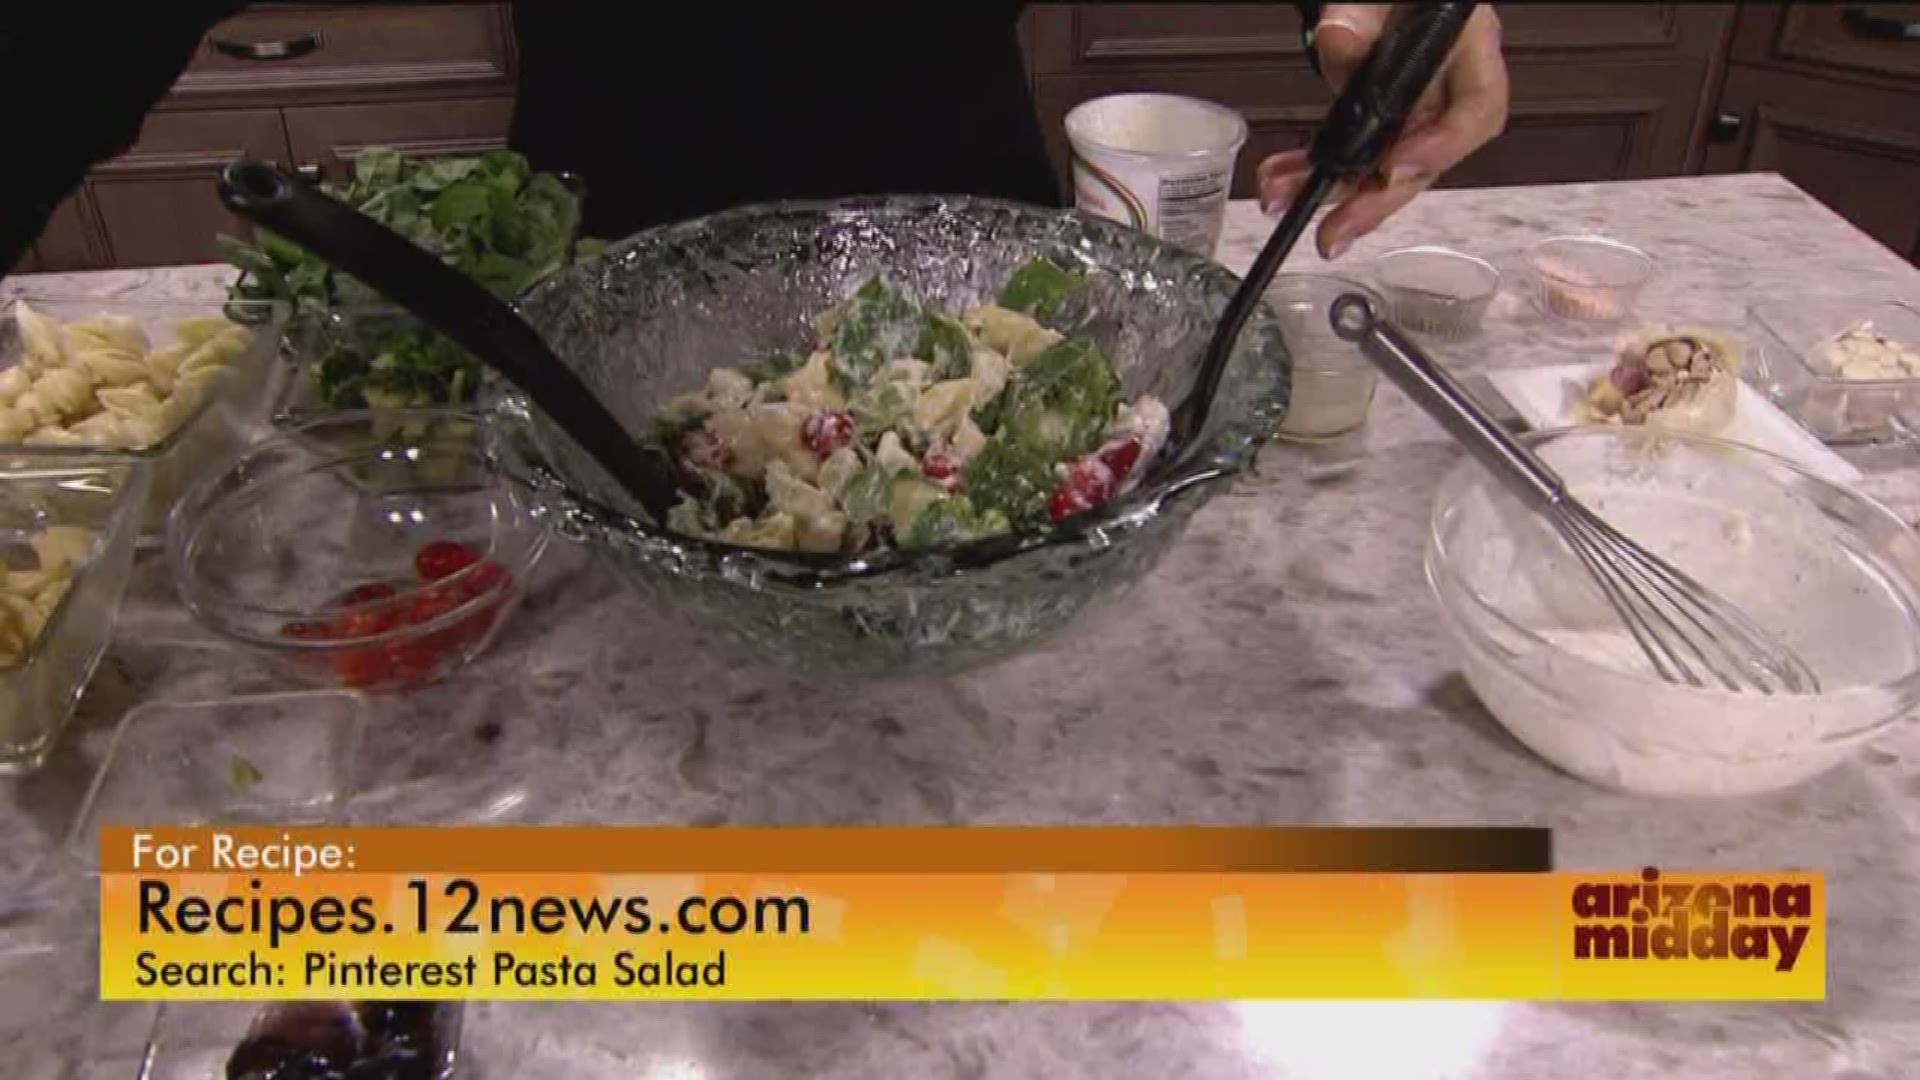 Believe it or not, this pasta salad recipe is the most pinned recipe on Pinterest. Jan shows us how to make it!